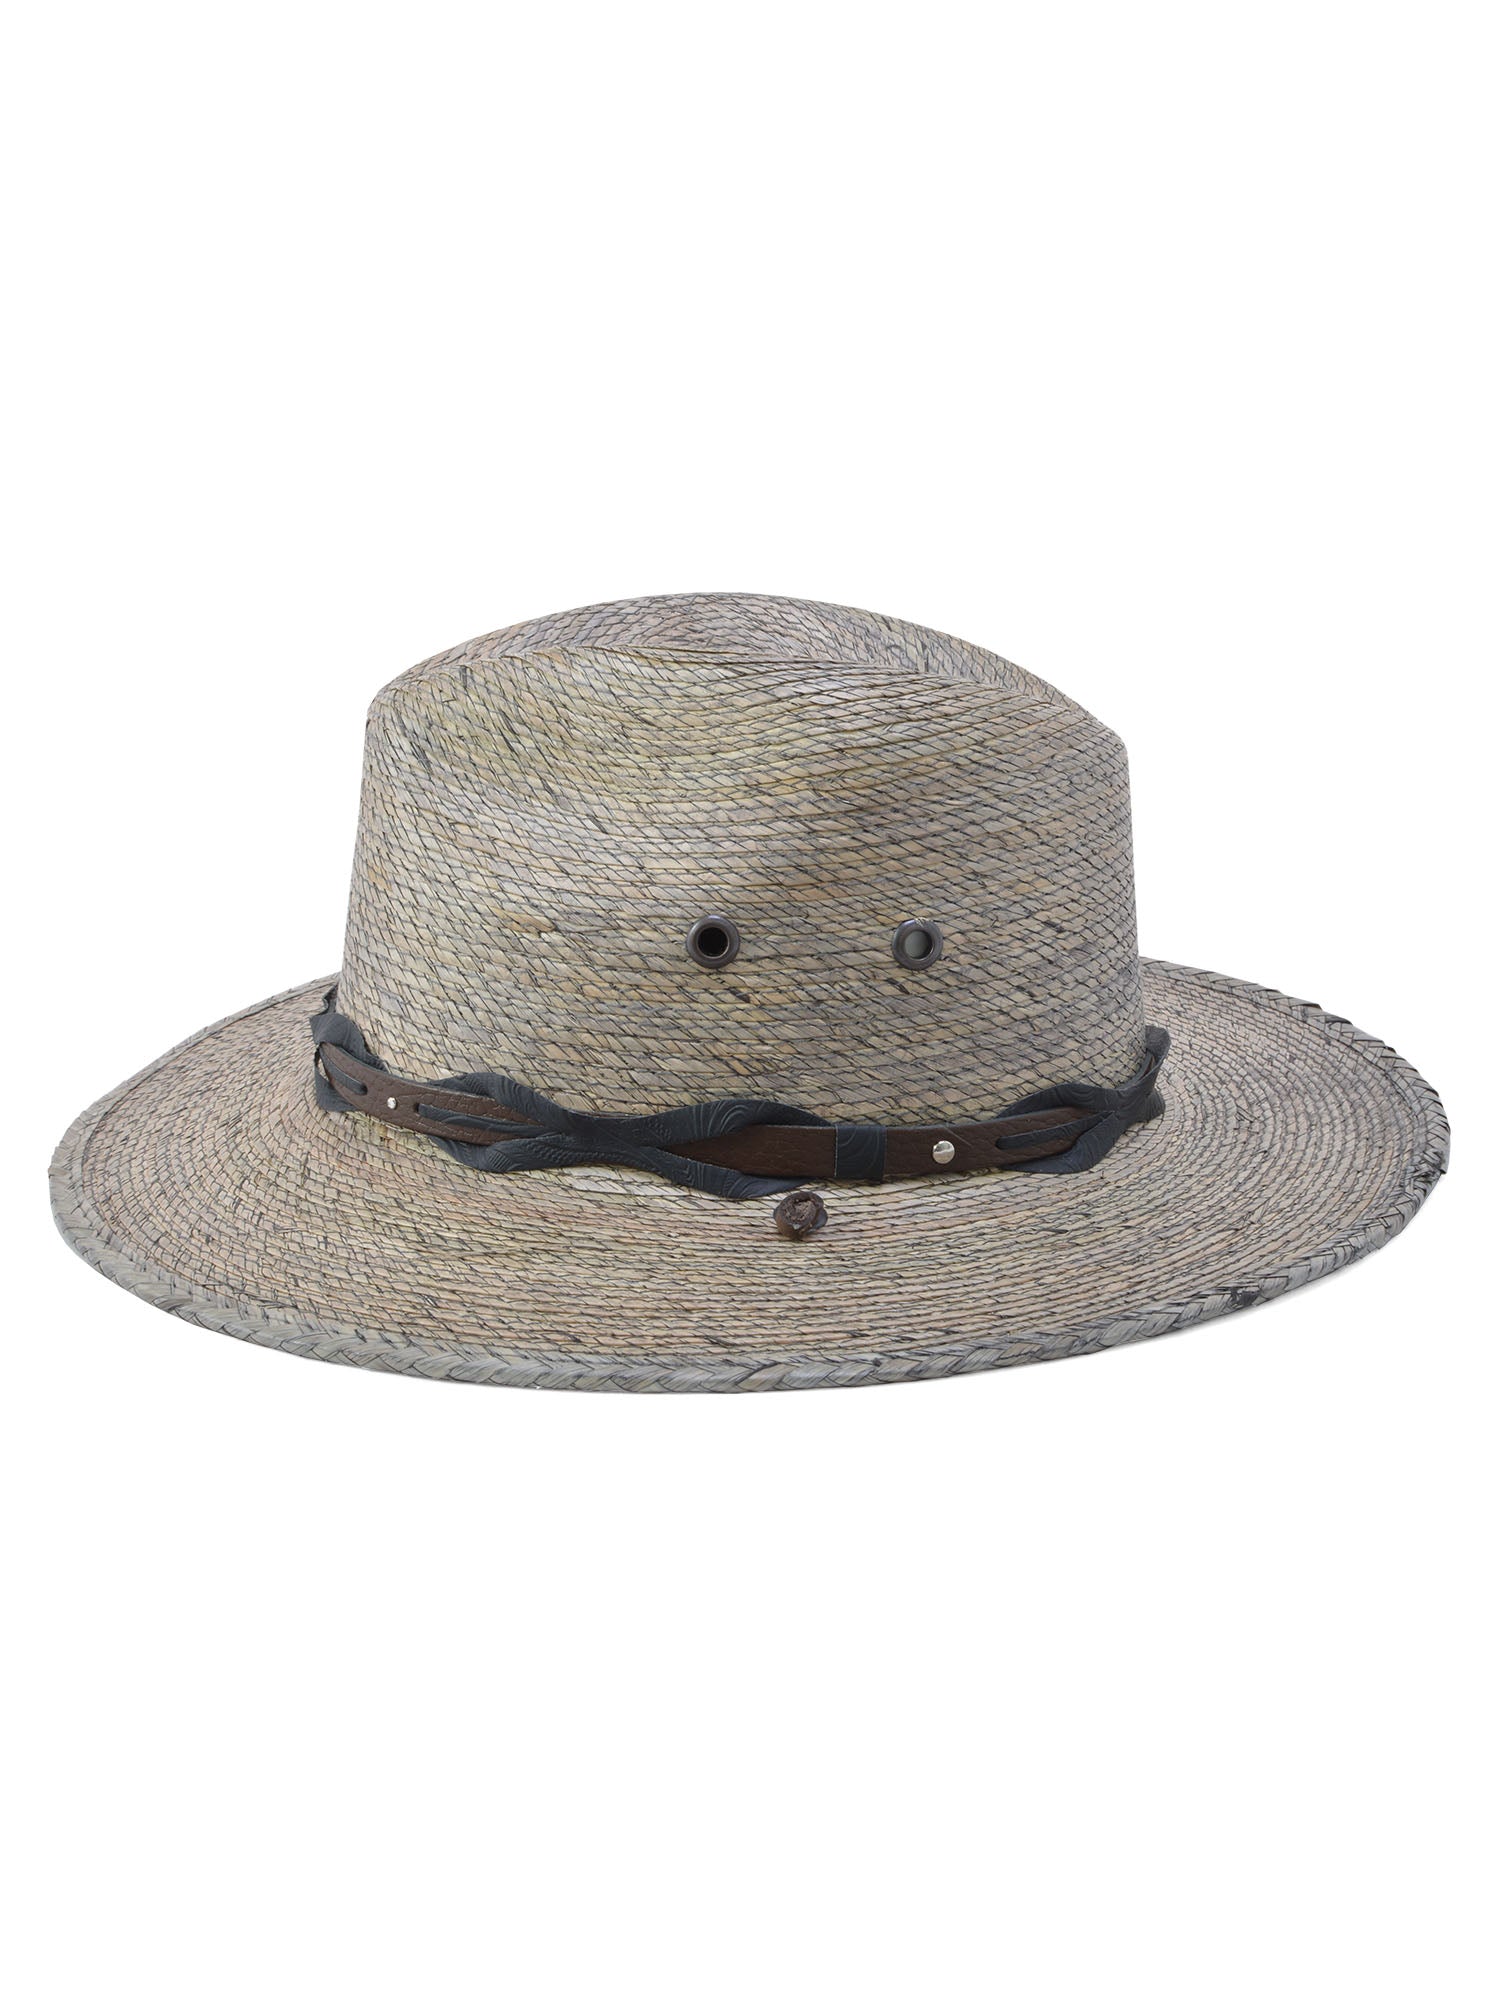 Stetson Marco Stained Palm Straw Hat-4